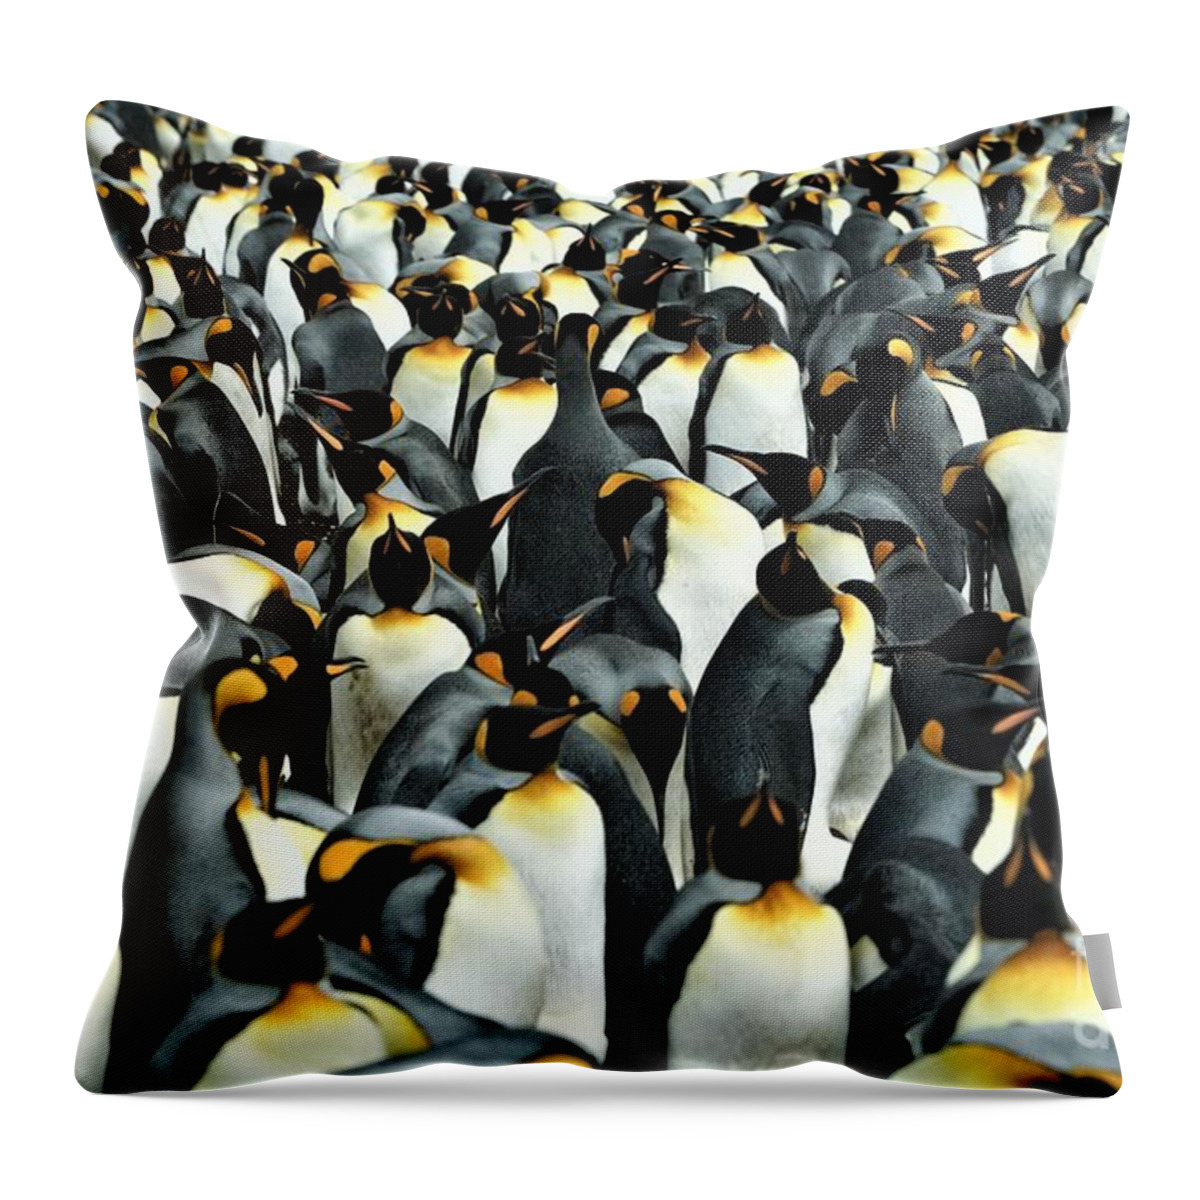 Penguins Throw Pillow featuring the photograph Kings of the Falklands by Darcy Dietrich